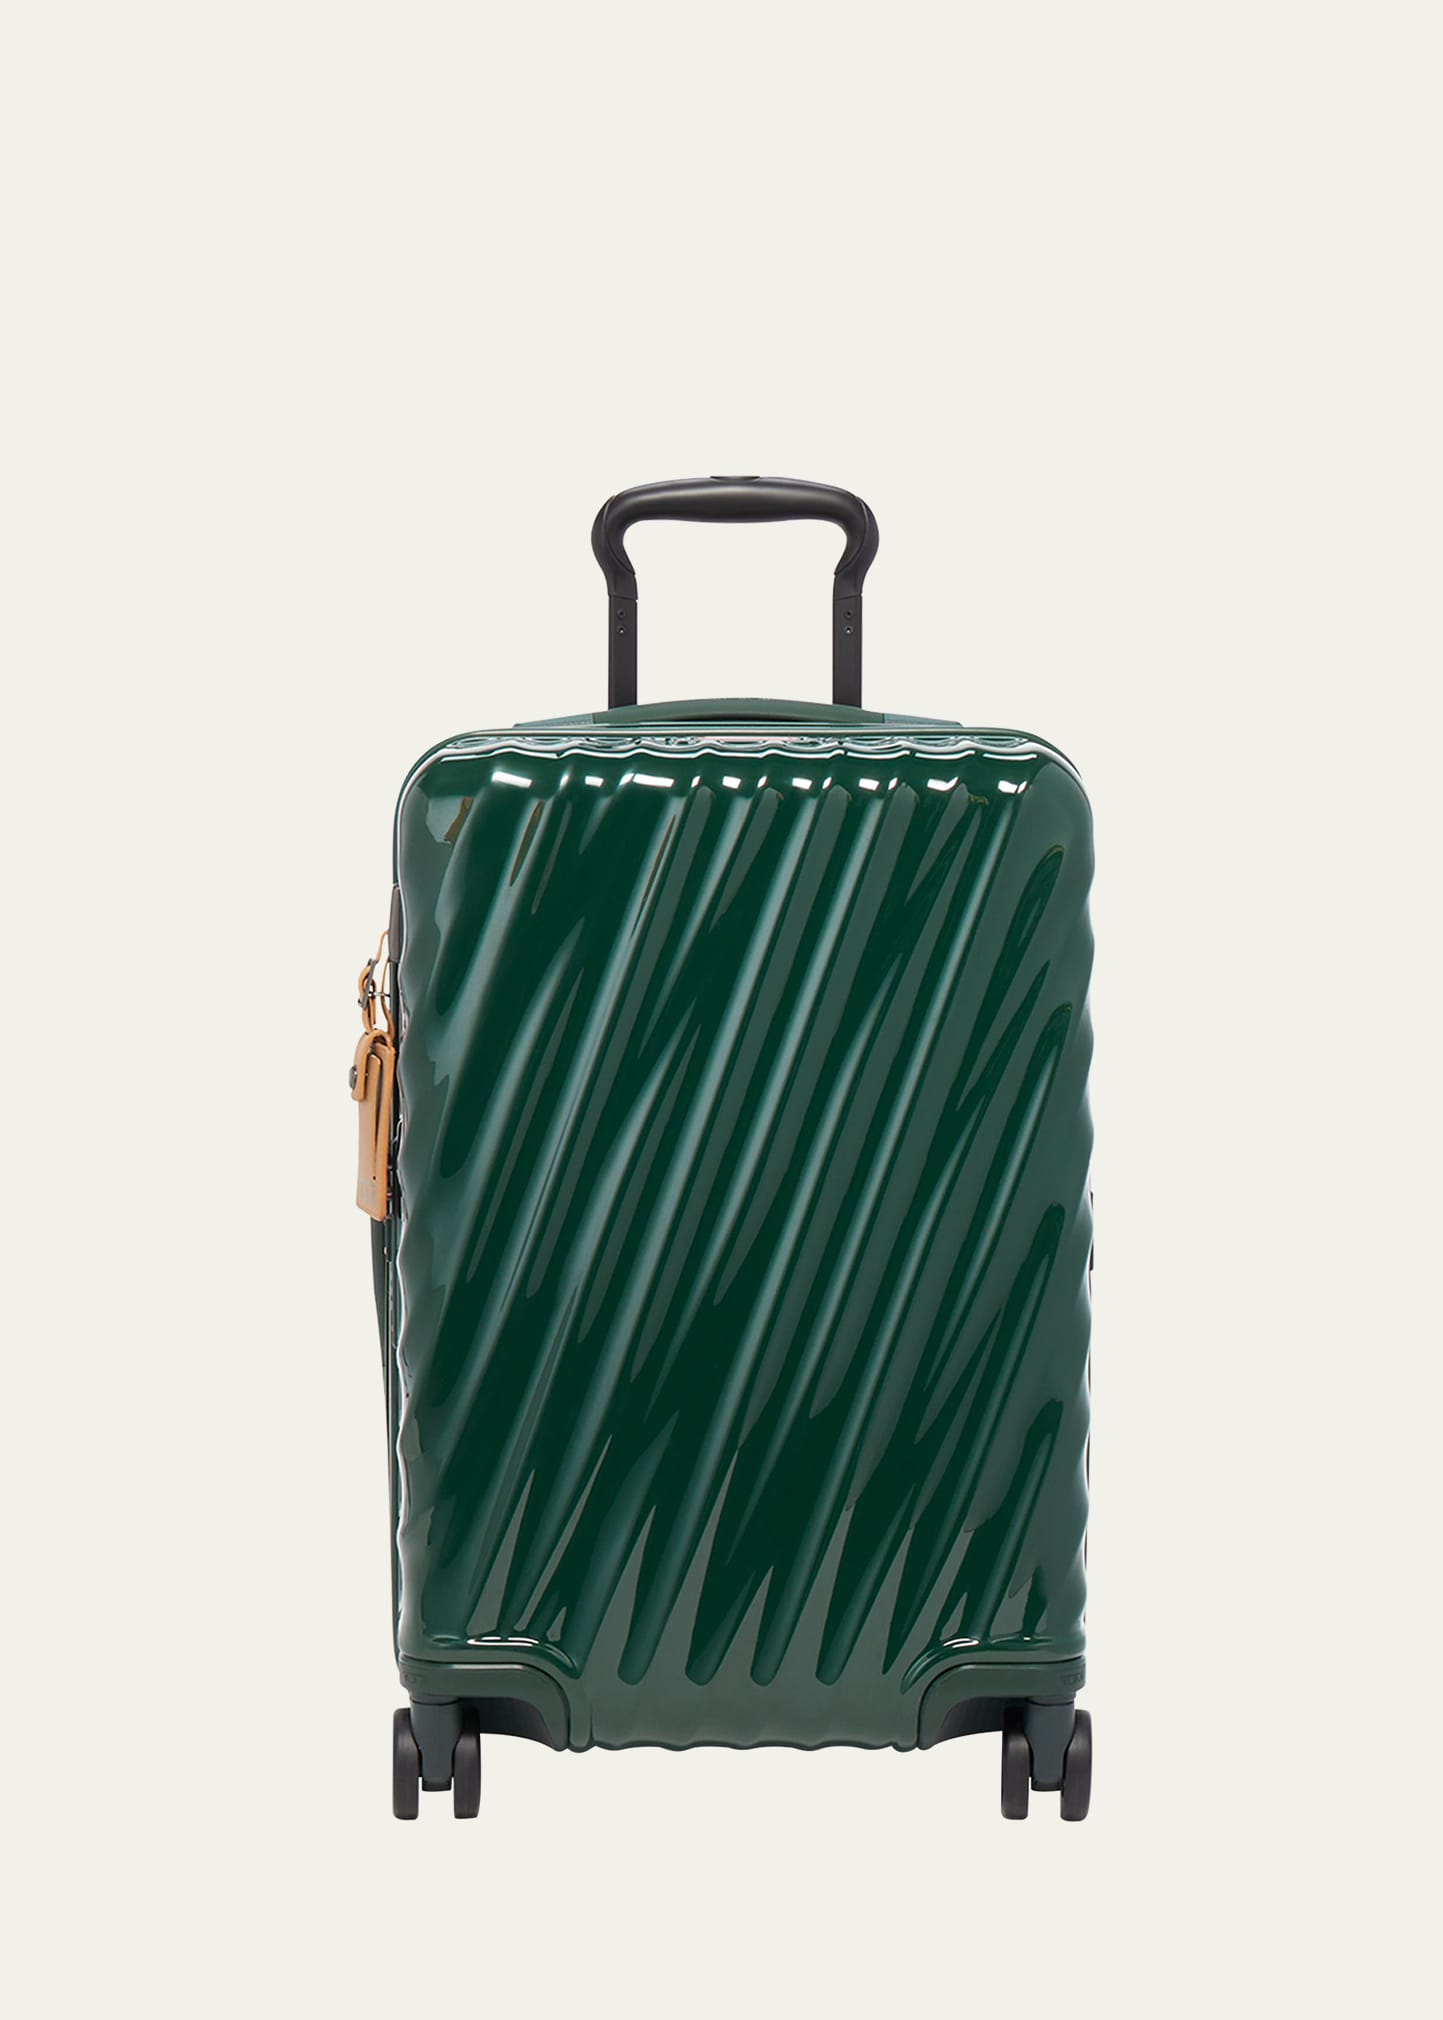 Tumi 19 Degree International Expandable 4-wheel Carry-on In Glossy Hunter Green